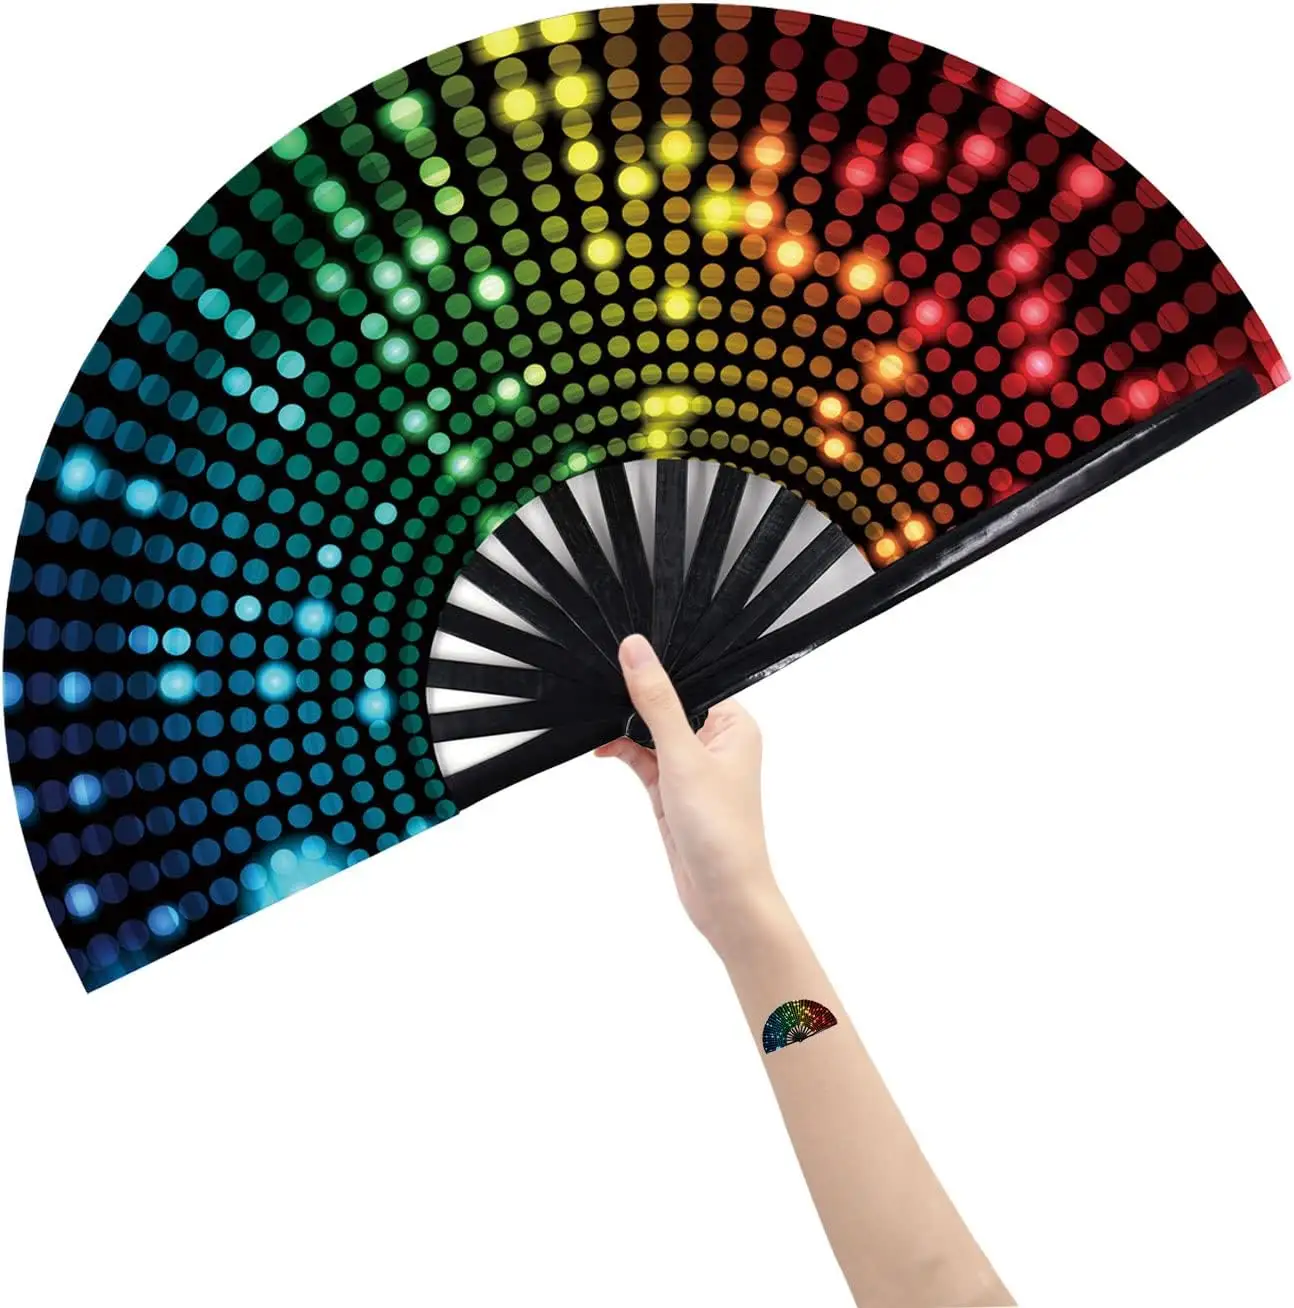 In Stock 33cm Custom Printing Large Folding Loud Clack Bamboo Wooden Hand Held Fan For Rave Flash Festivals Accessories